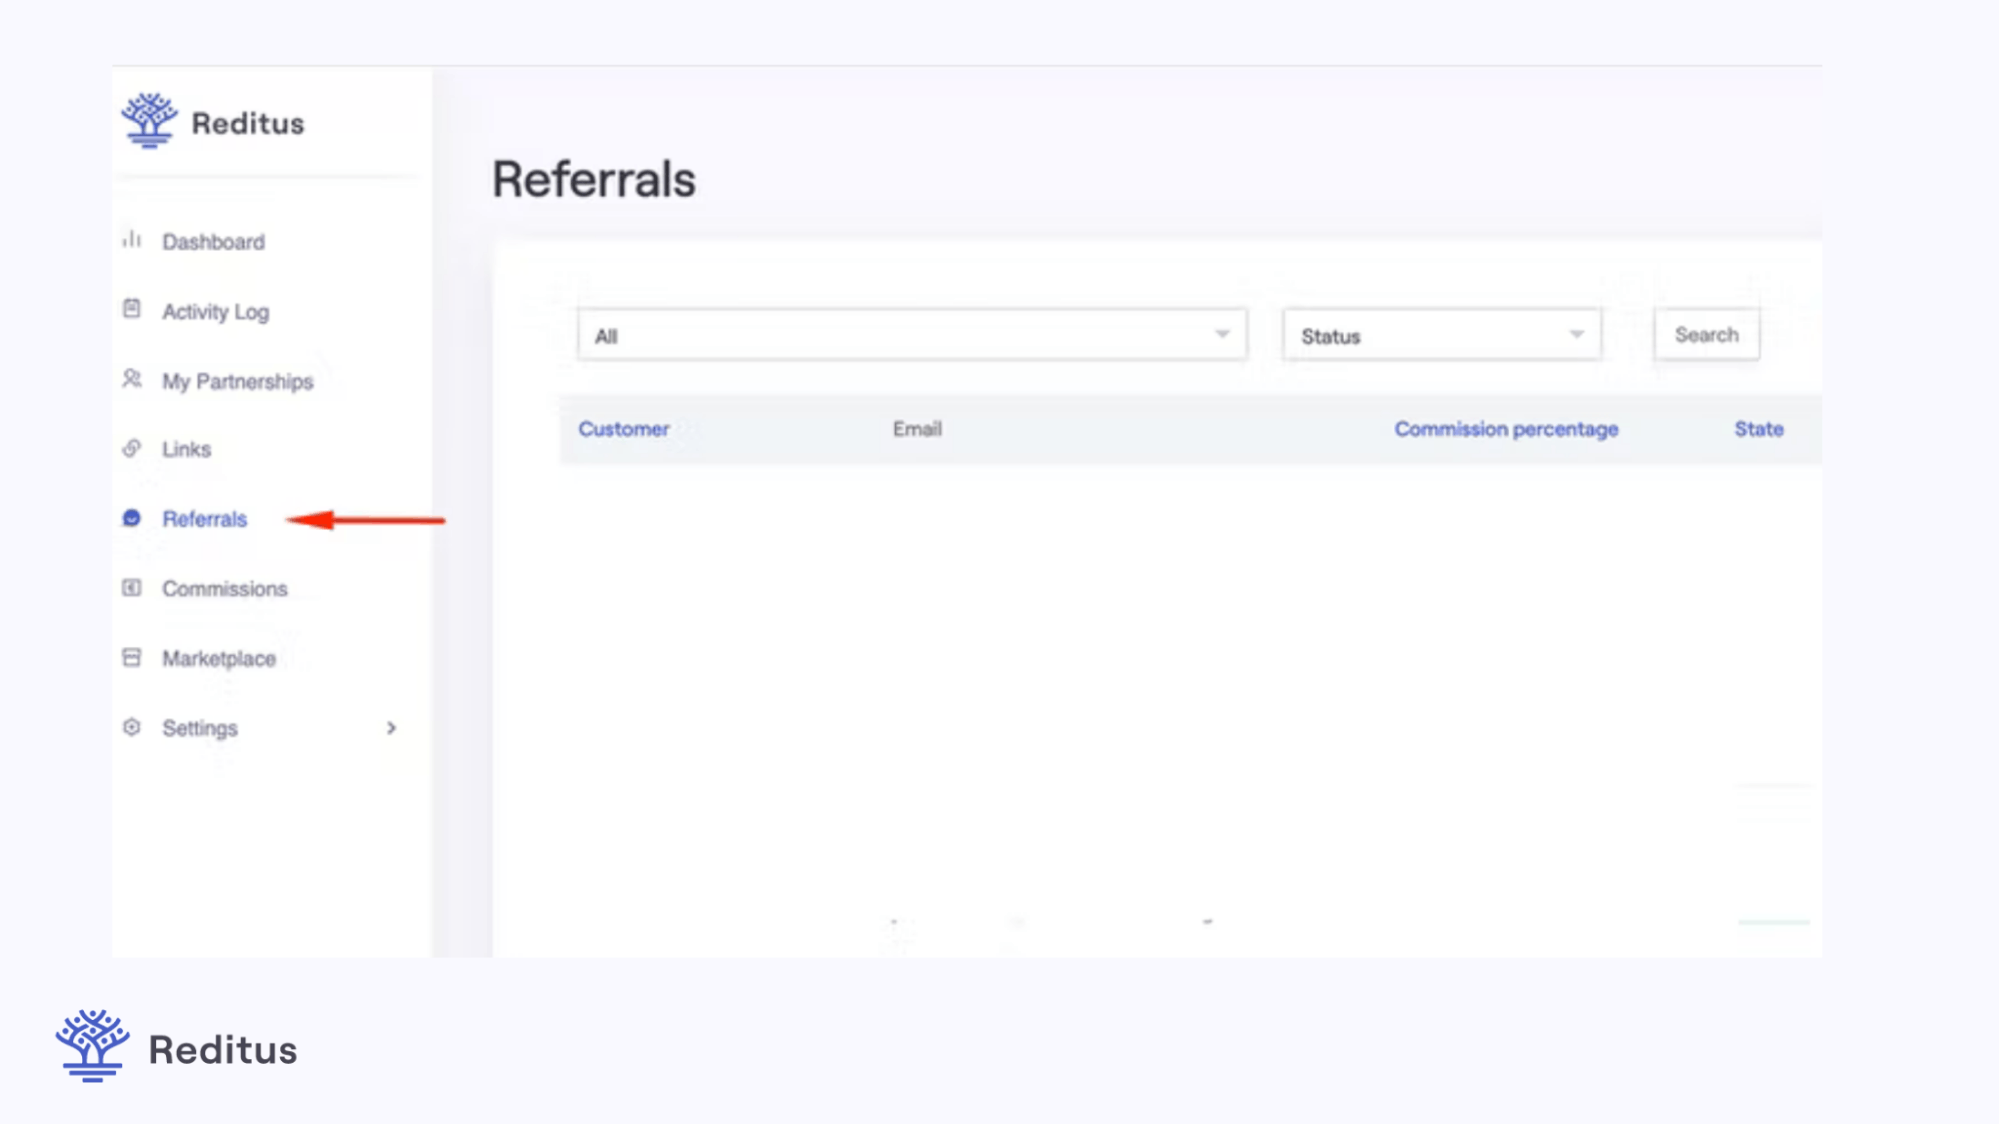 How to manage referrals inside Reditus (screenshot)